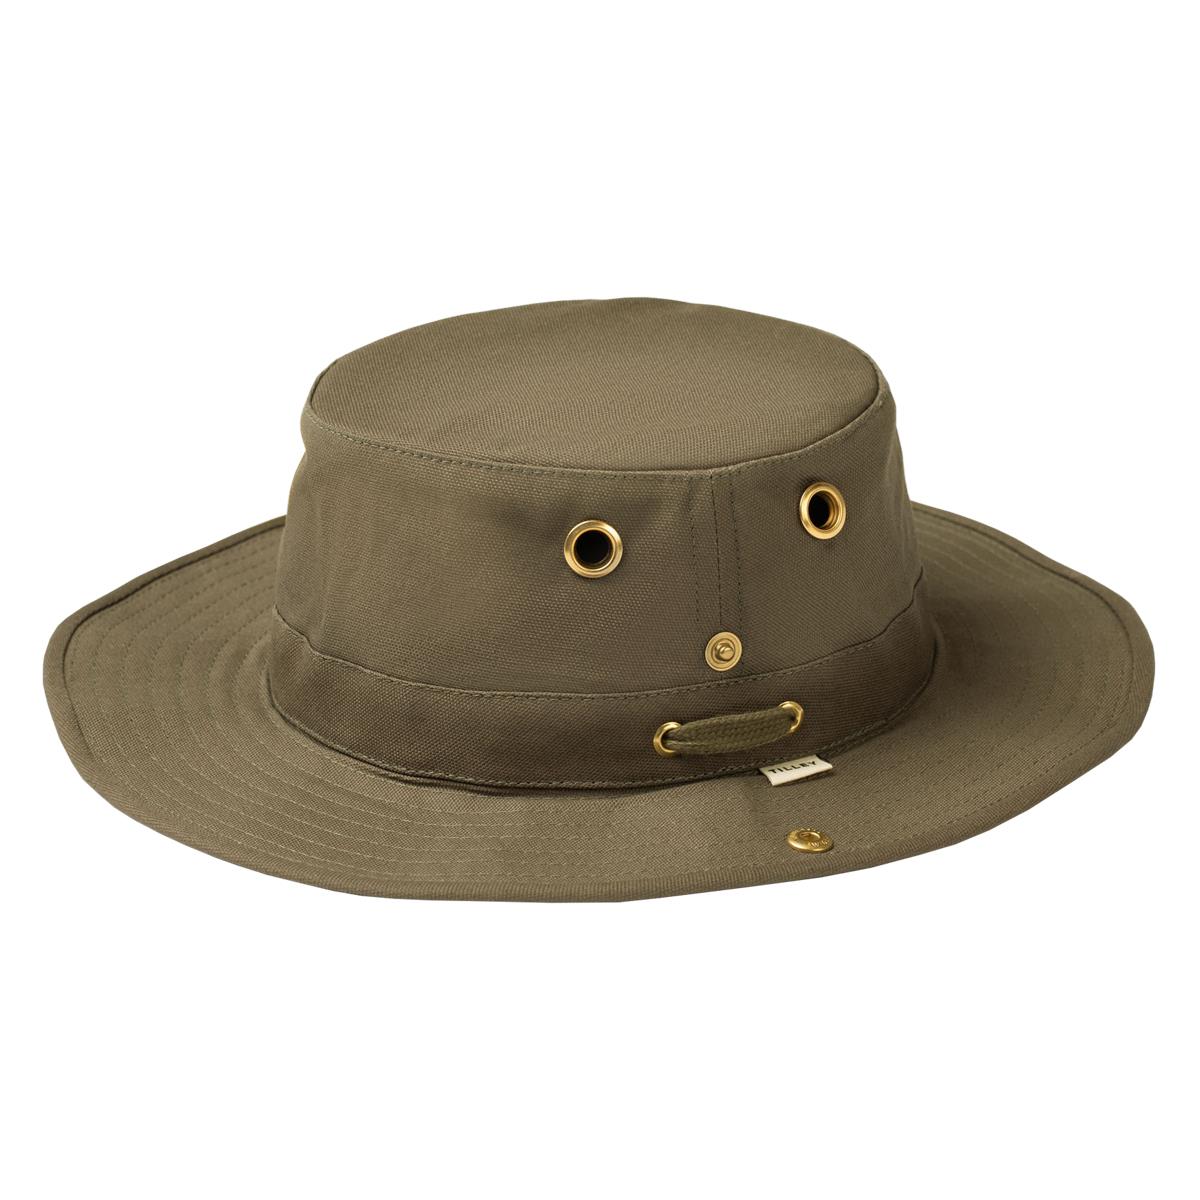 What is hemp used for in the Tilley hemp hat?